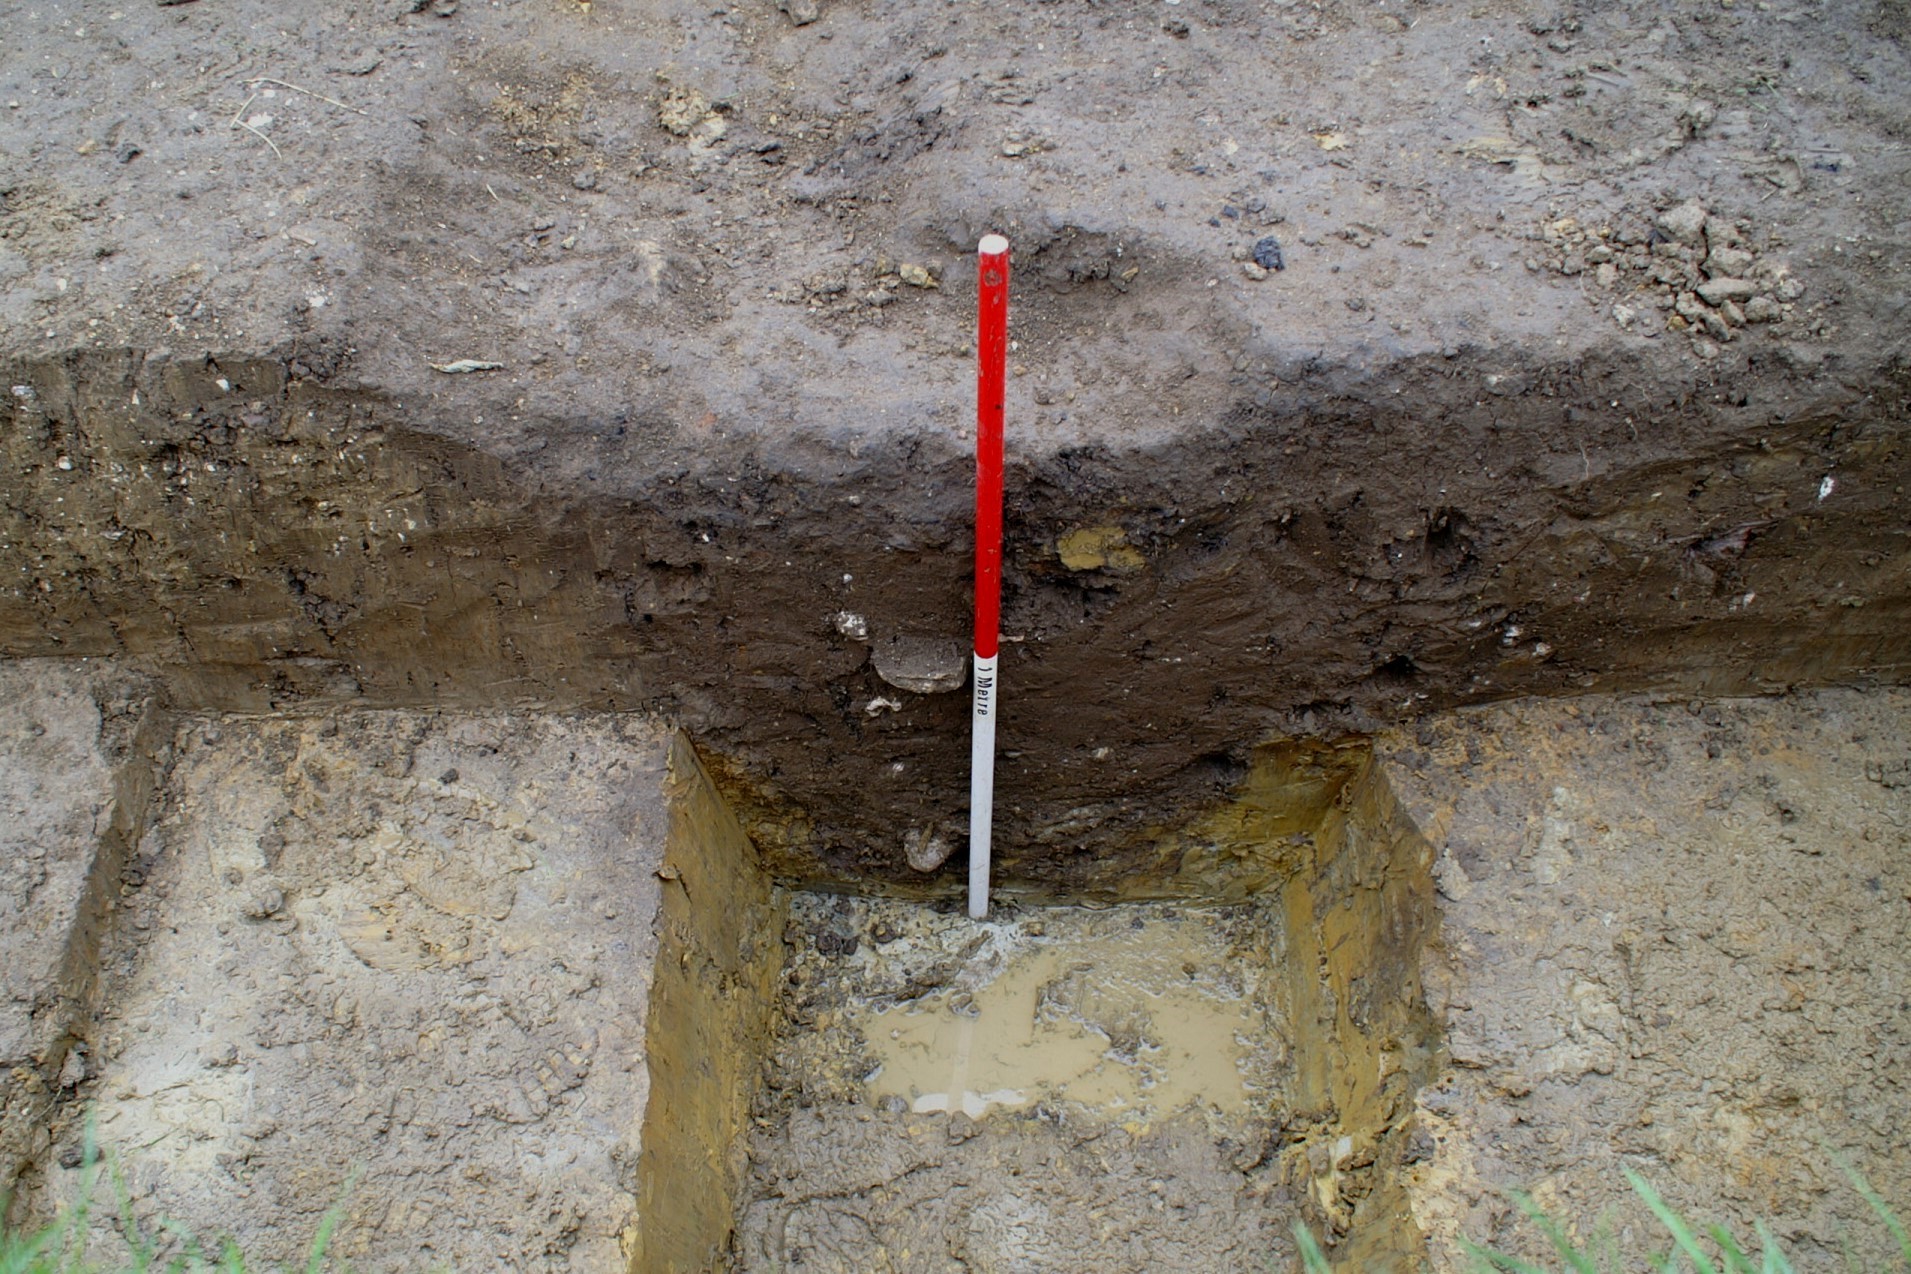 The ditch in Trench 1